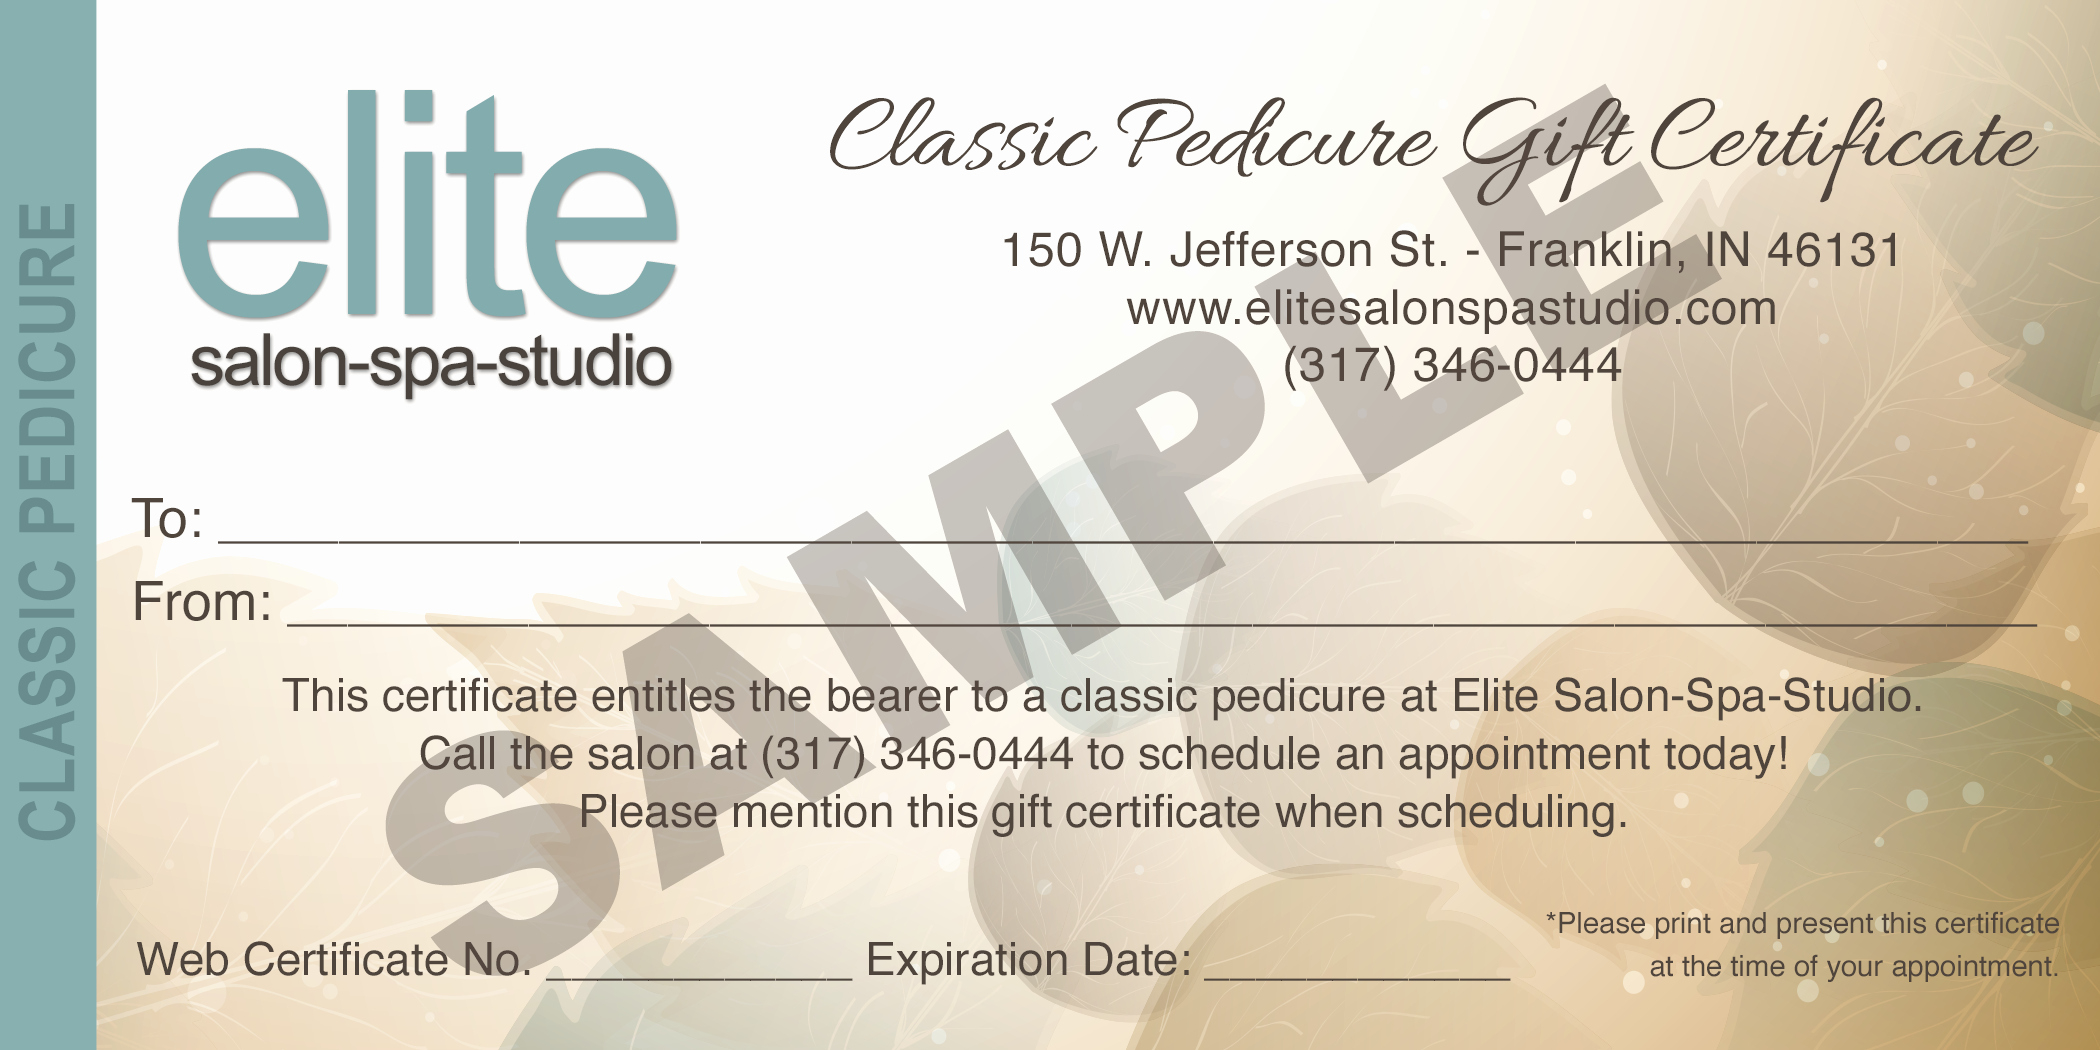 30 Mani Pedi Gift Certificate Template | Pryncepality With This Certificate Entitles The Bearer To Template